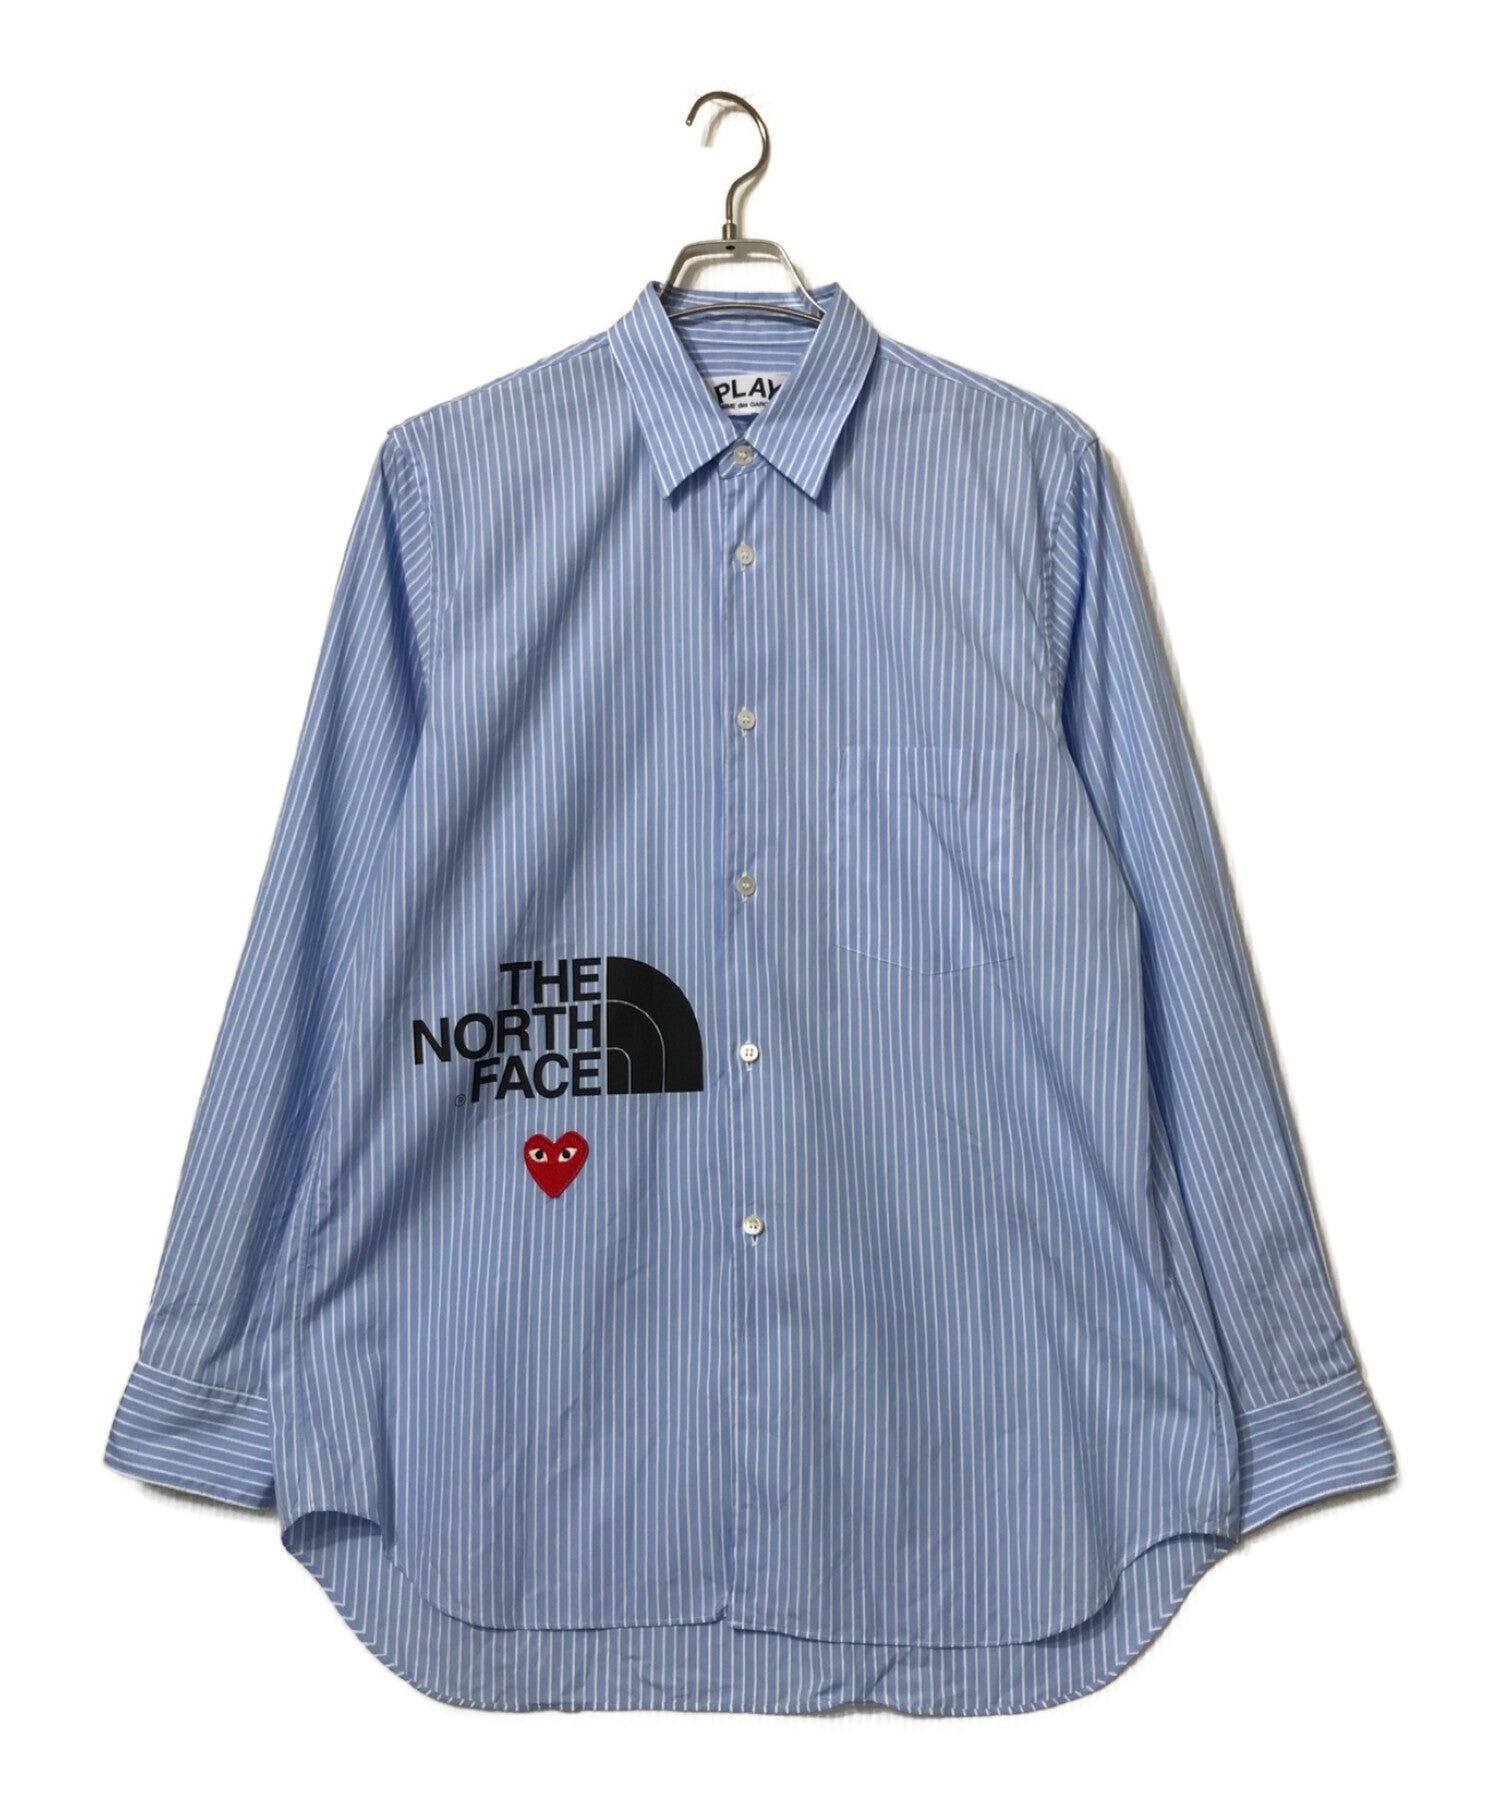 PLAY COMME des GARCONS × THE NORTH FACE shirt (underwear) AE-B202